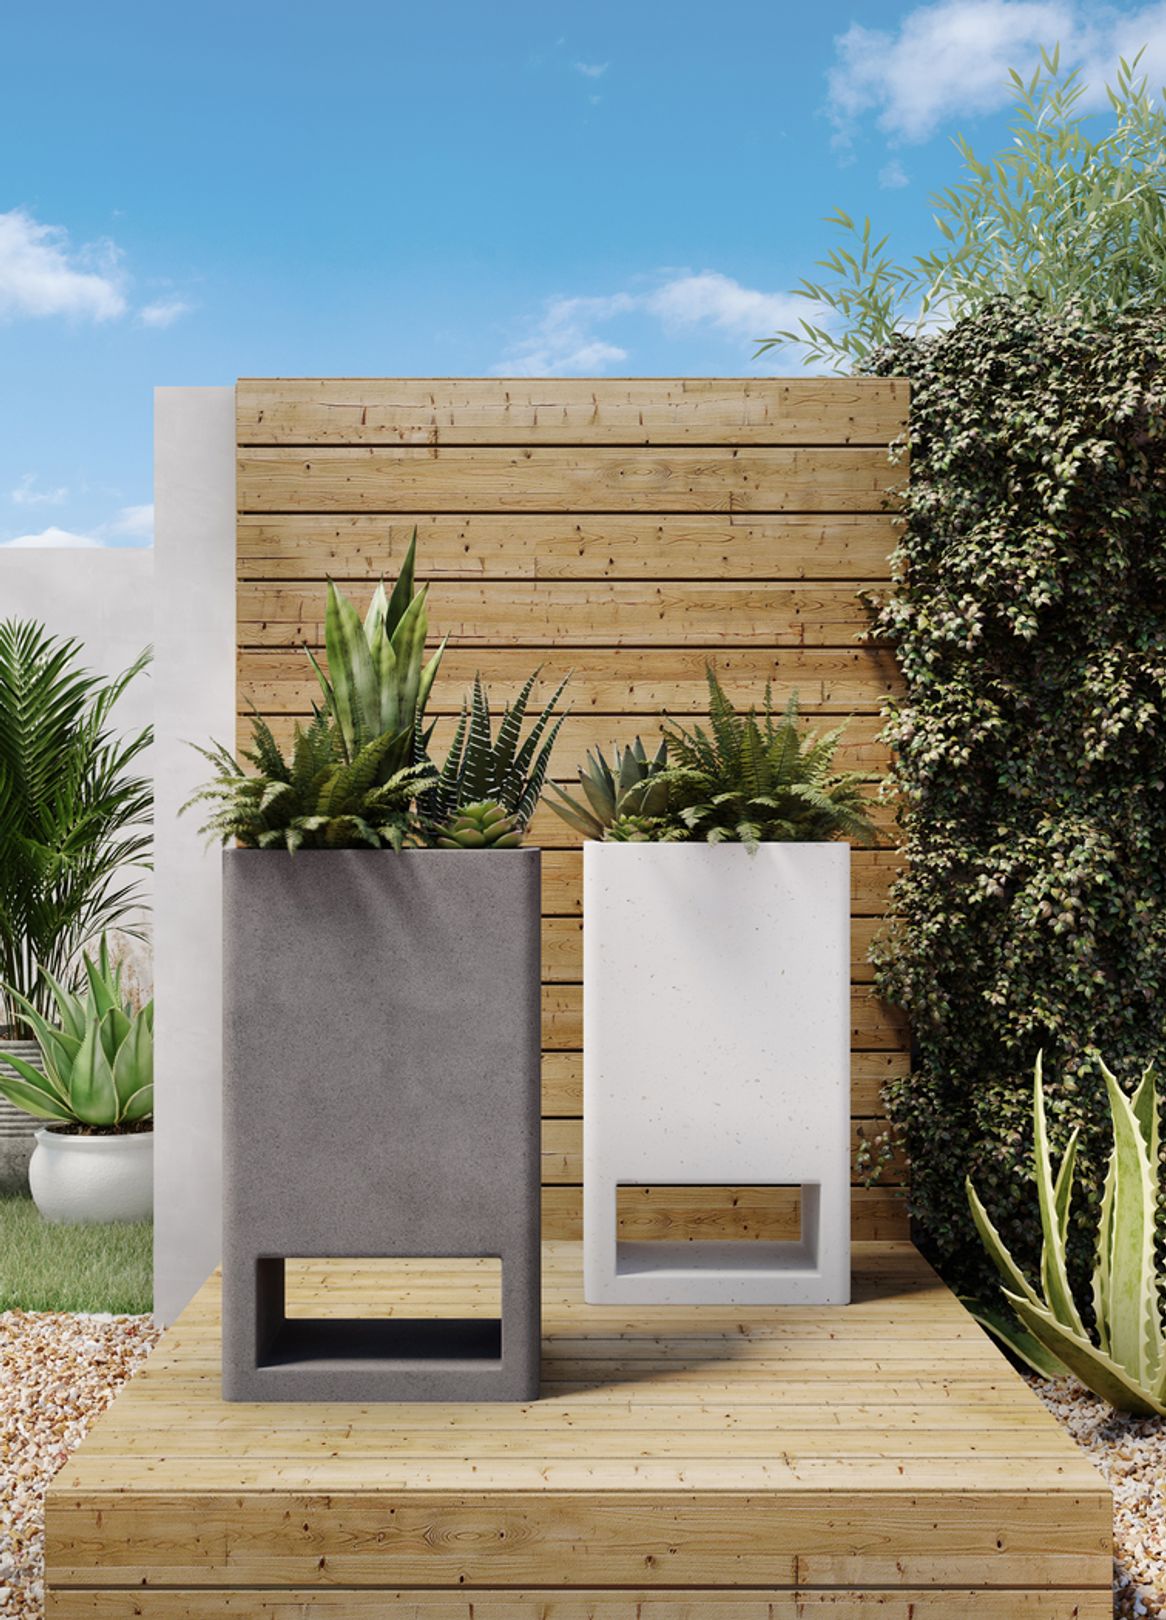 Photo of a wooden platform with two planters, one gray and one white